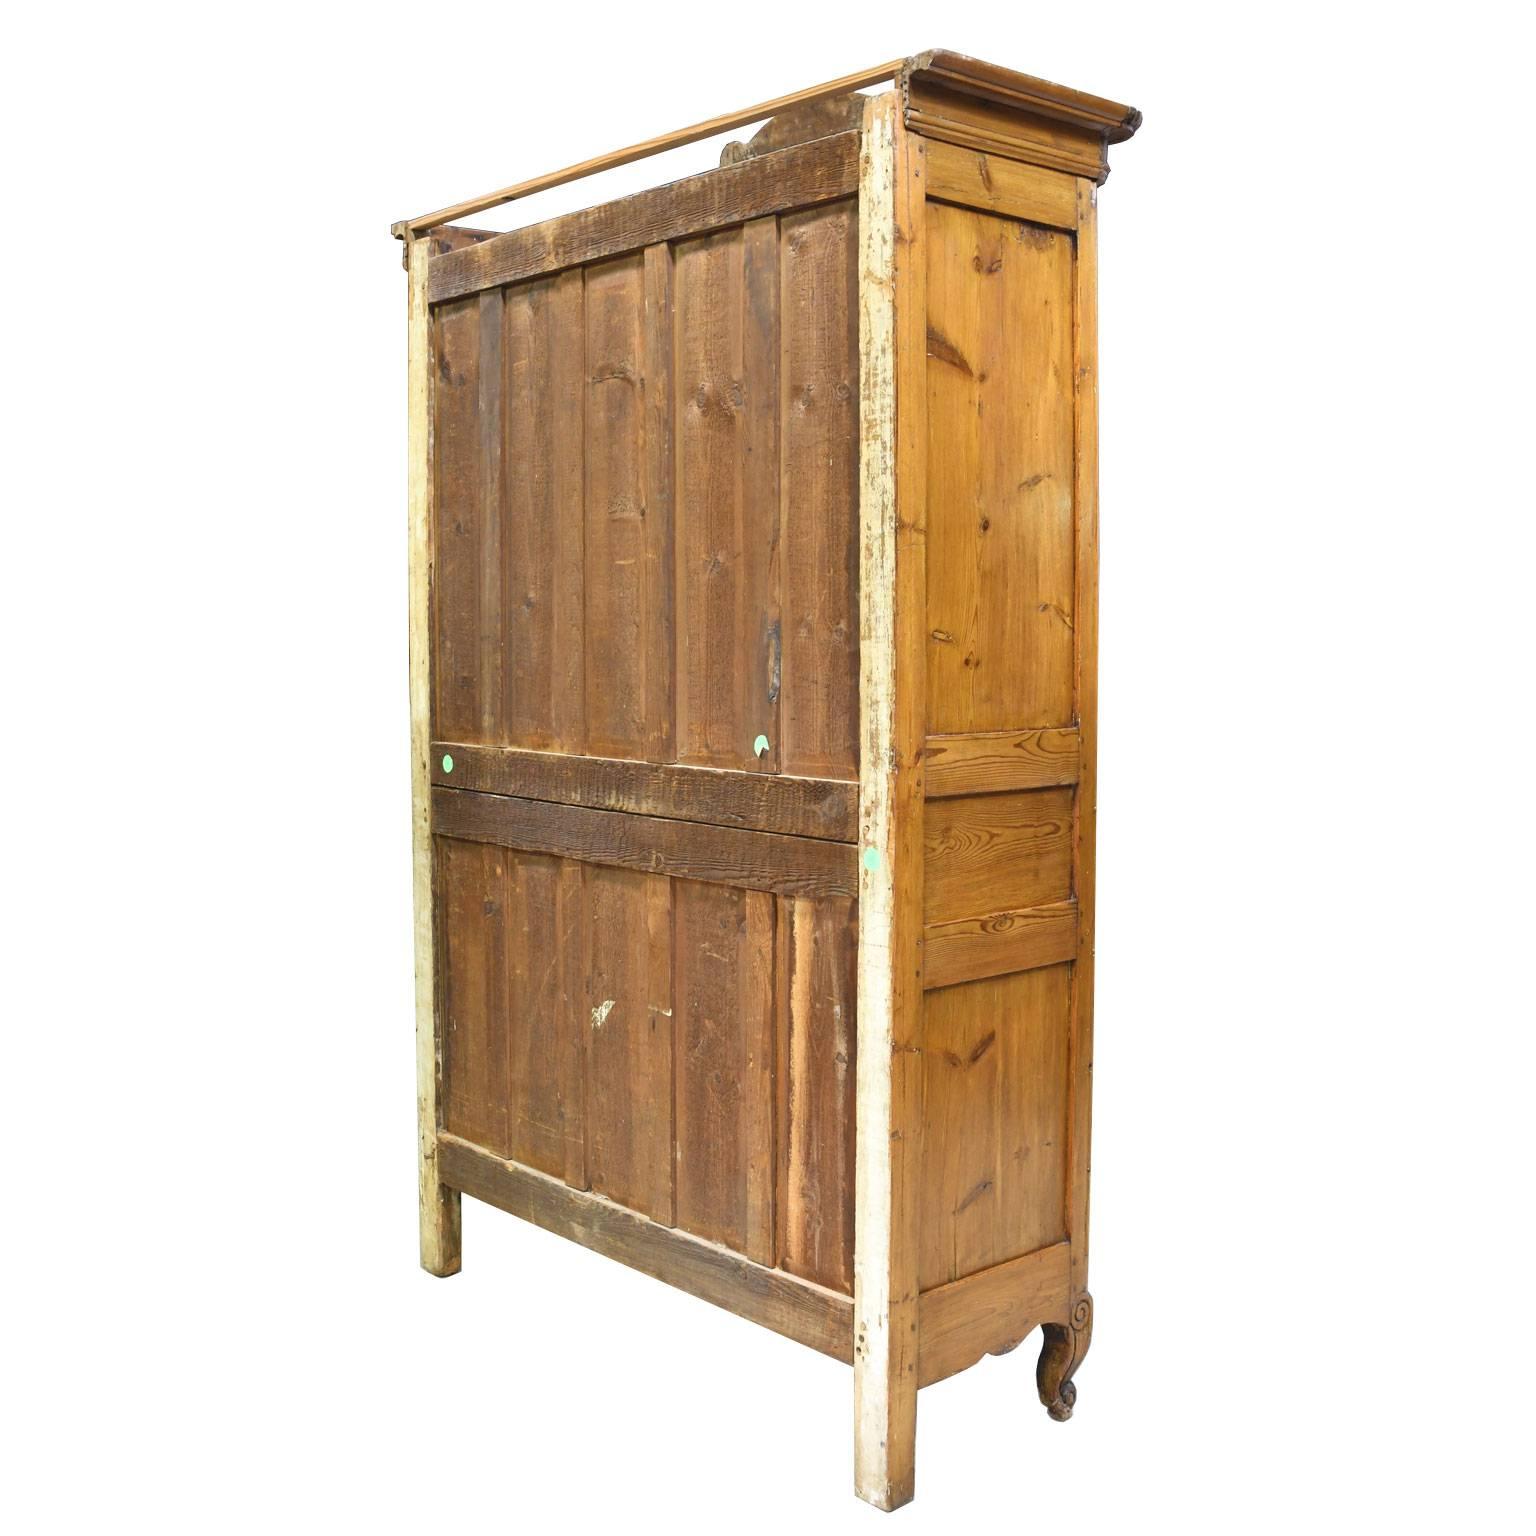 French Provincial 18th Century French Marriage Armoire in Pitch Pine from Normandy